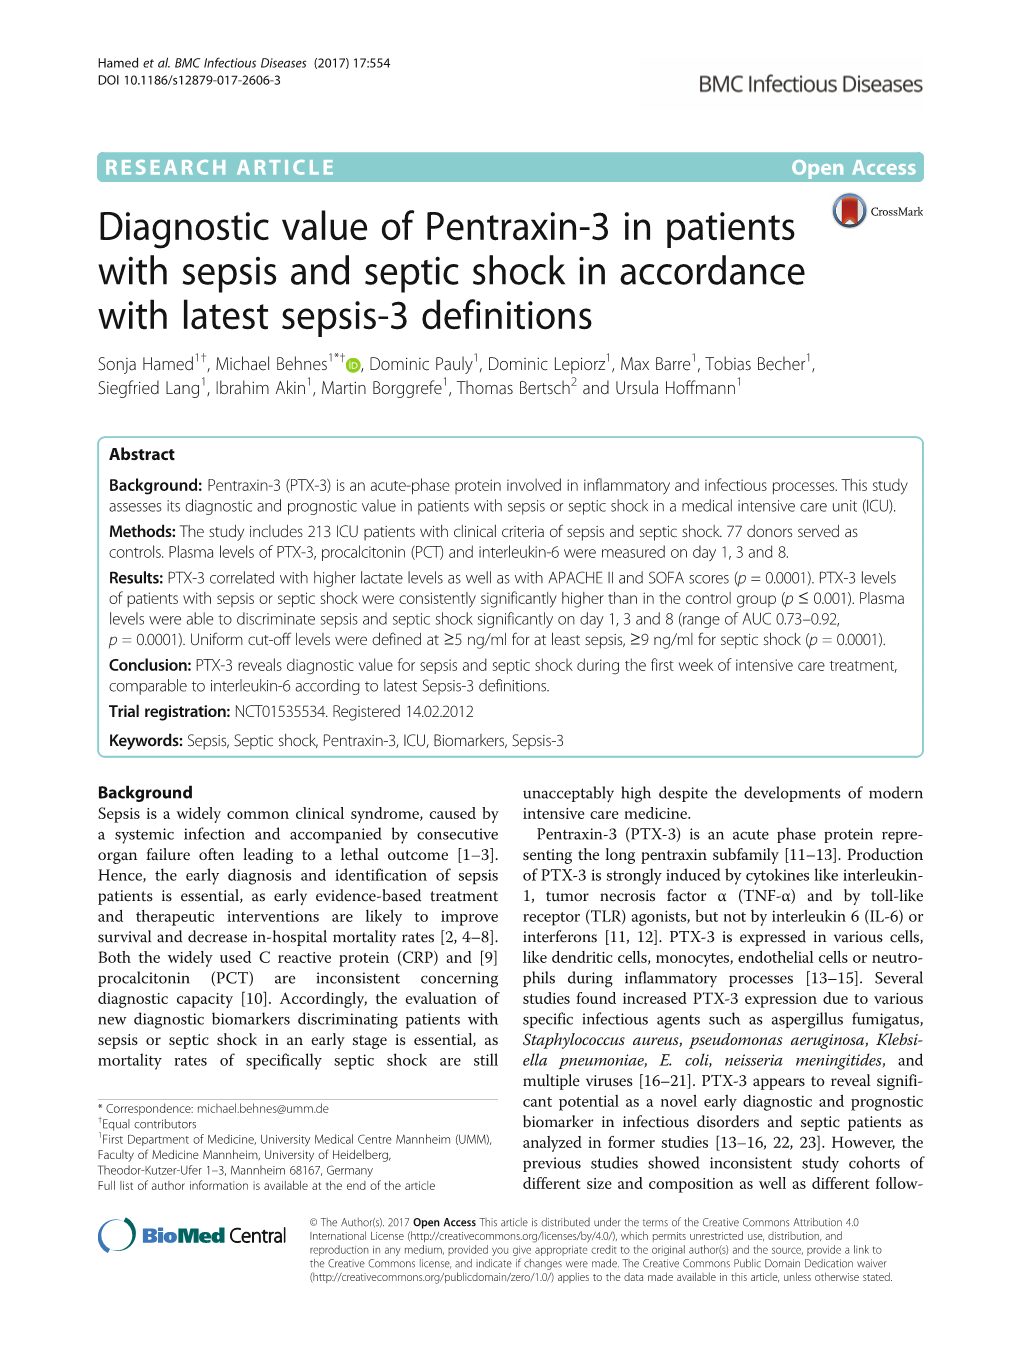 Diagnostic Value of Pentraxin-3 in Patients with Sepsis and Septic Shock in Accordance with Latest Sepsis-3 Definitions